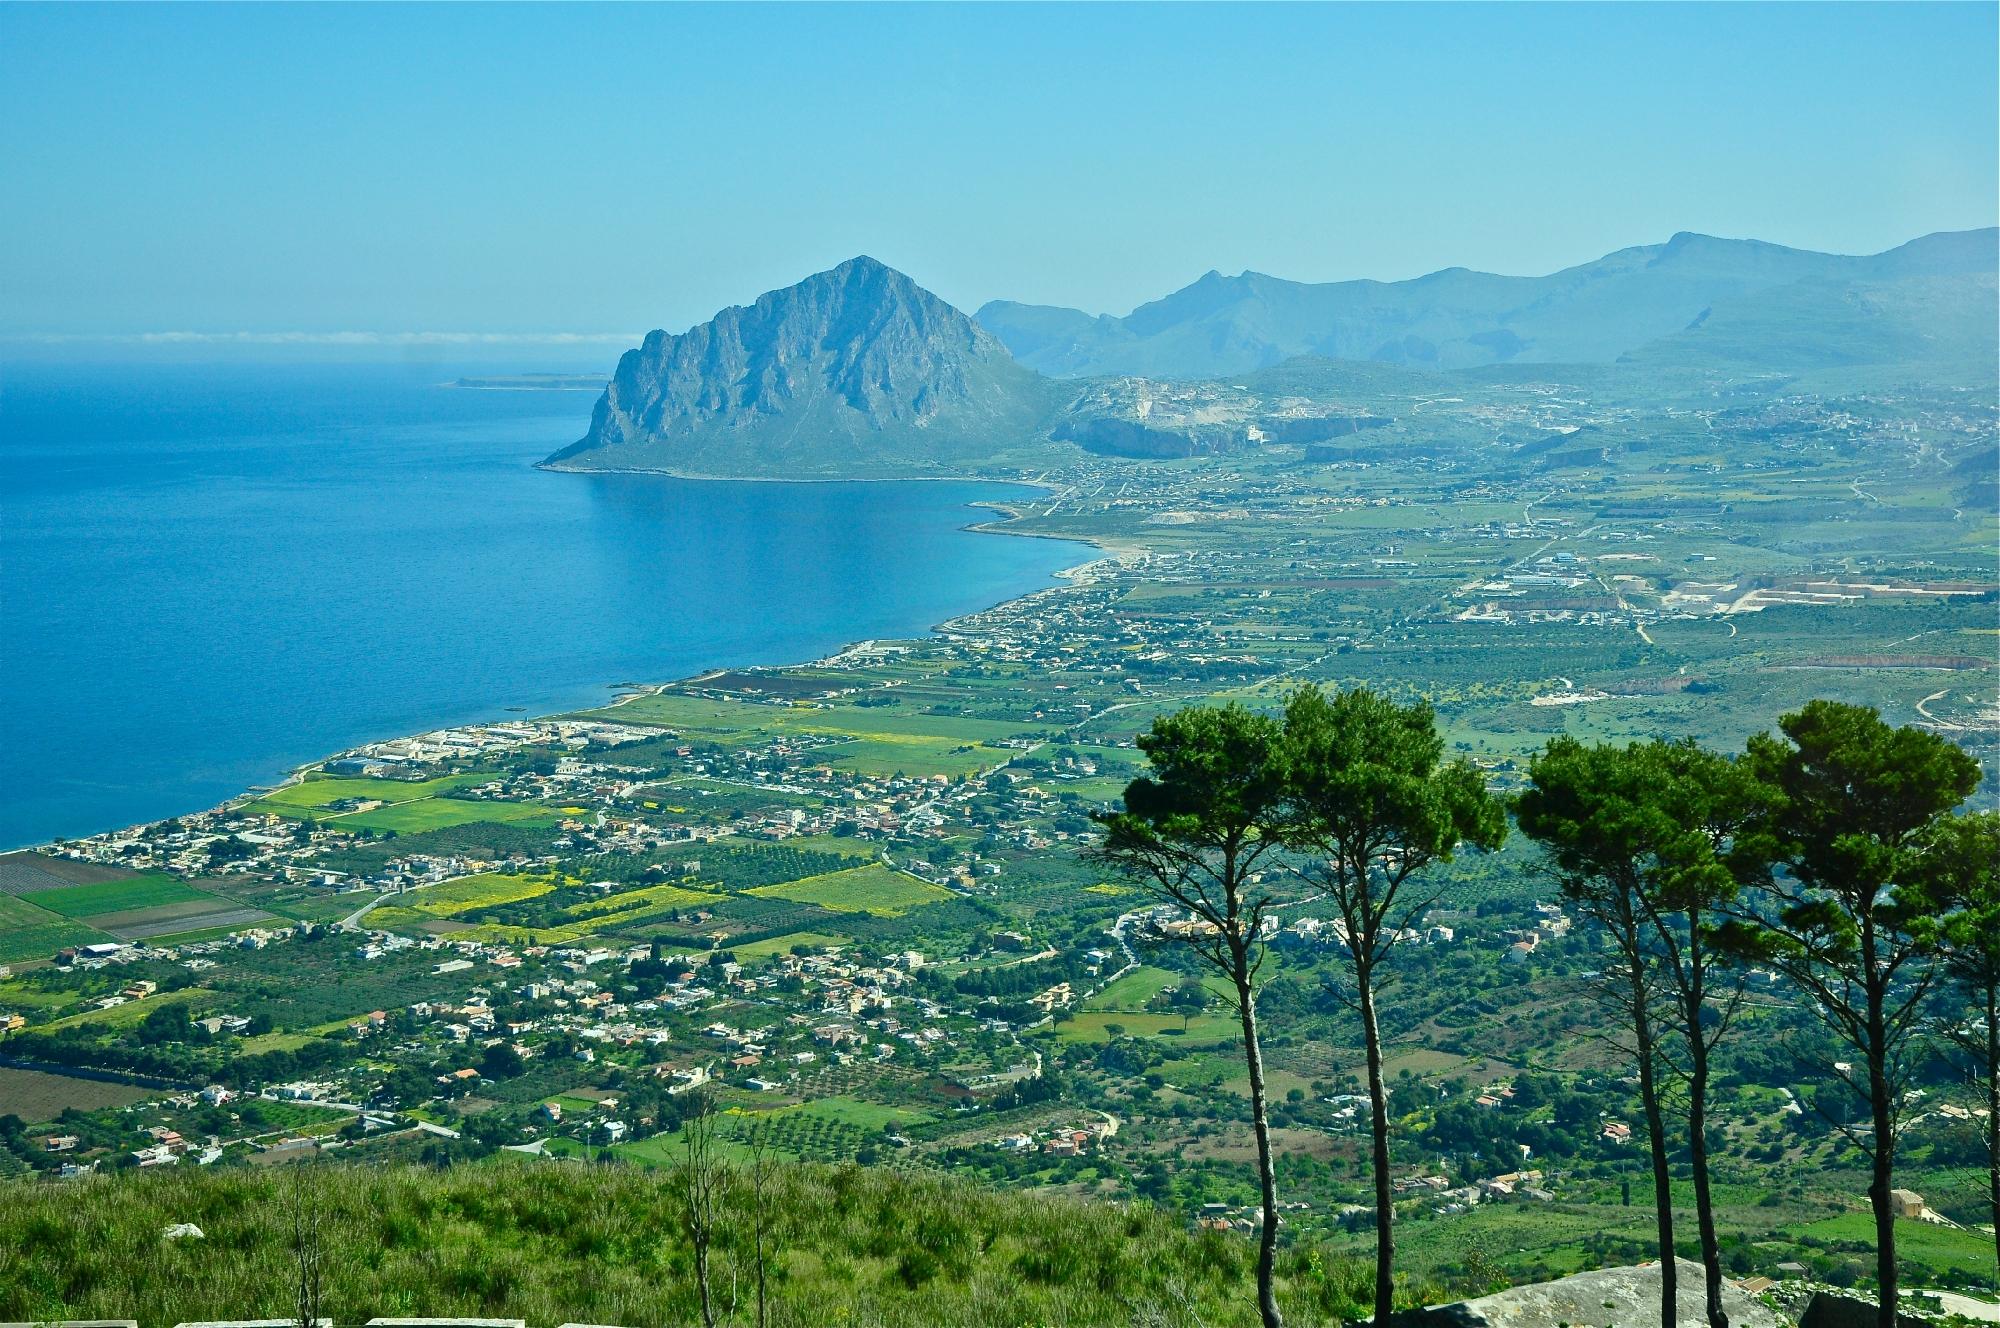 Guided Tours in Sicily - Day Tours